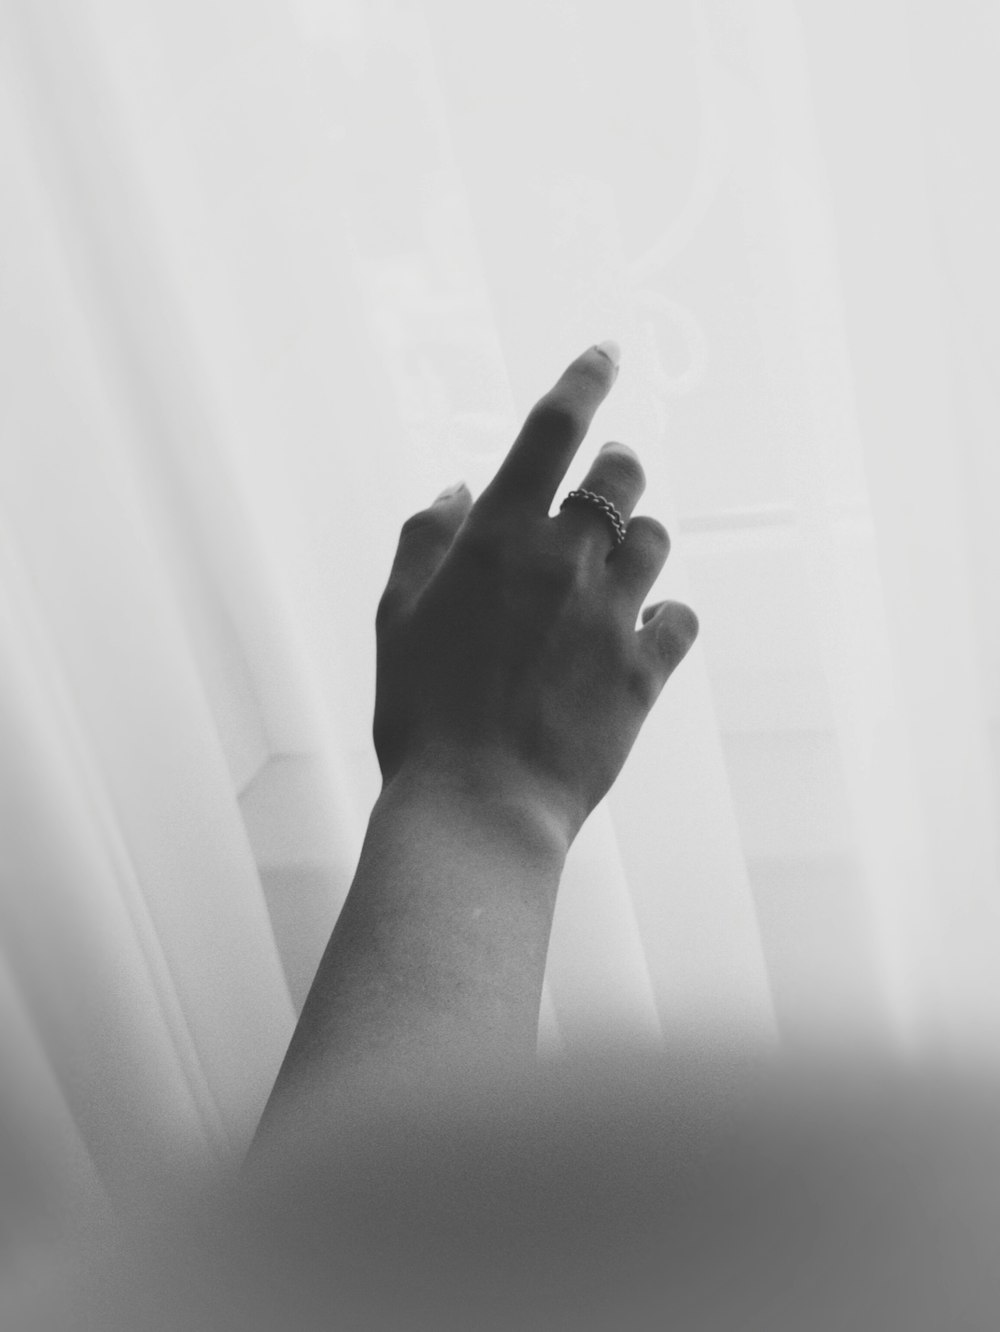 a person's hand reaching up towards a window